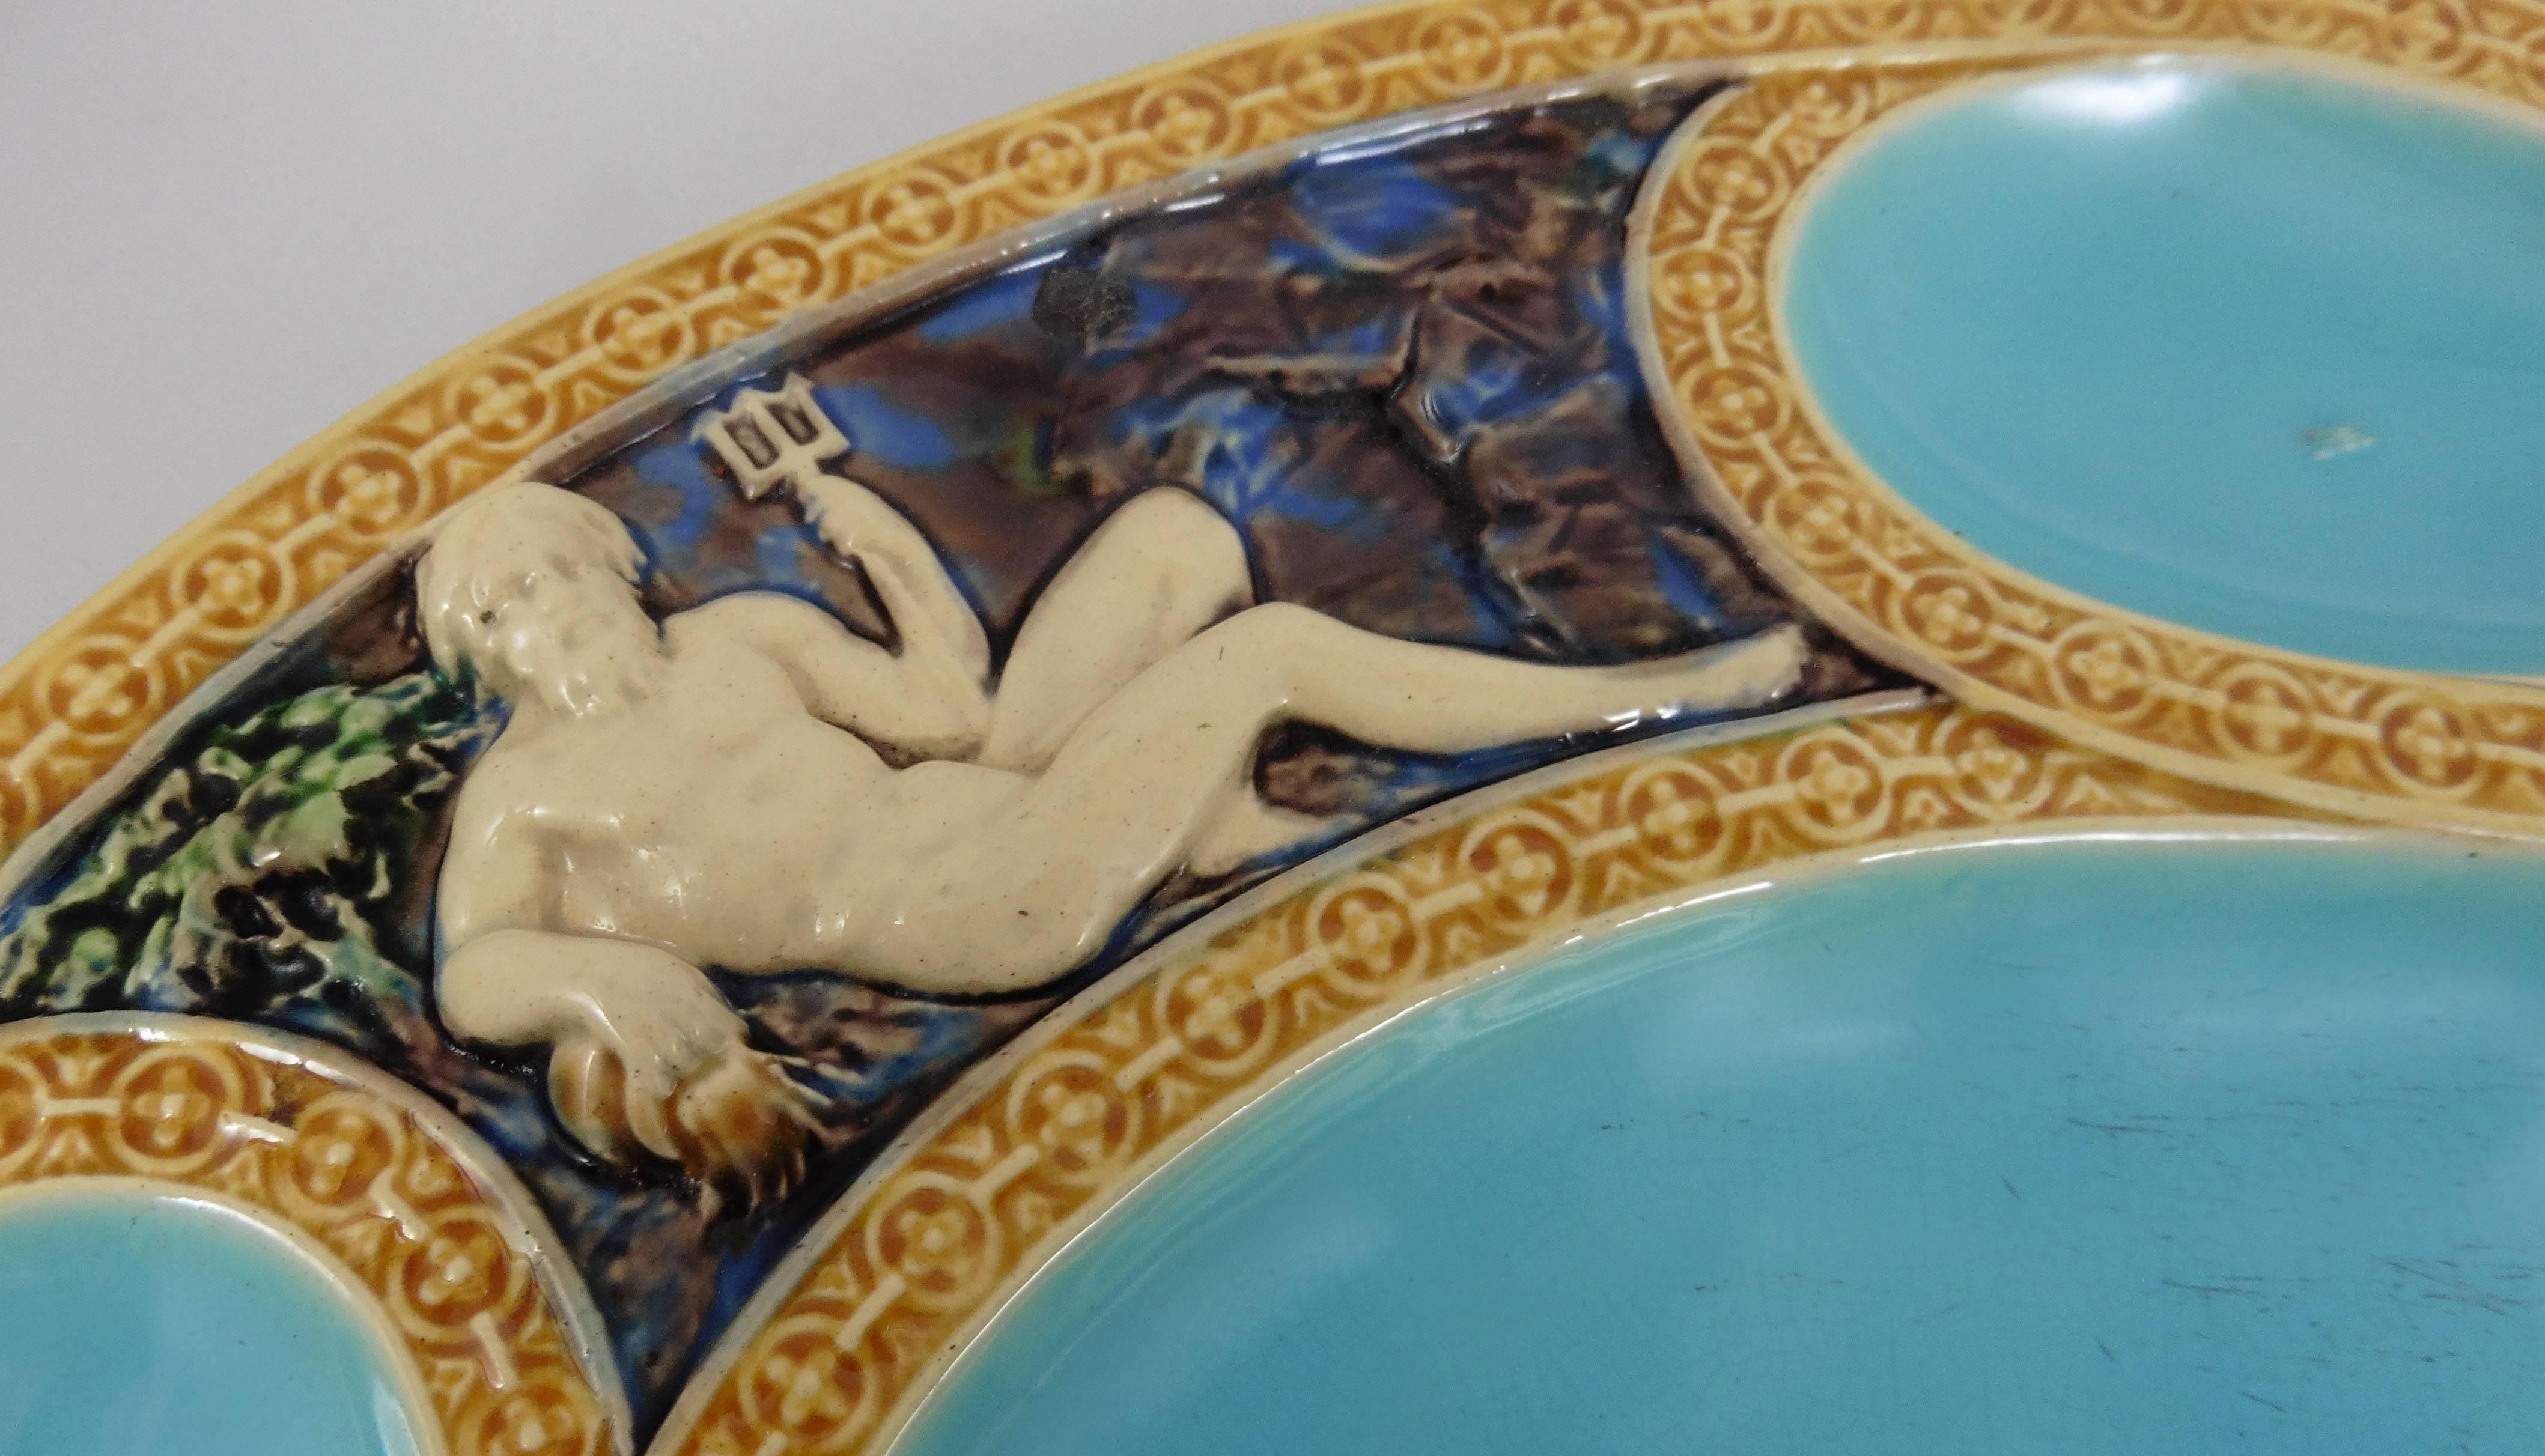 Majolica mythological platter which features four figural panels molded with Juno, Neptune, Mercury and Selene signed Minton, circa 1865.
This platter had a rare turquoise blue background is an example of the Renaissance Revival at the end of the